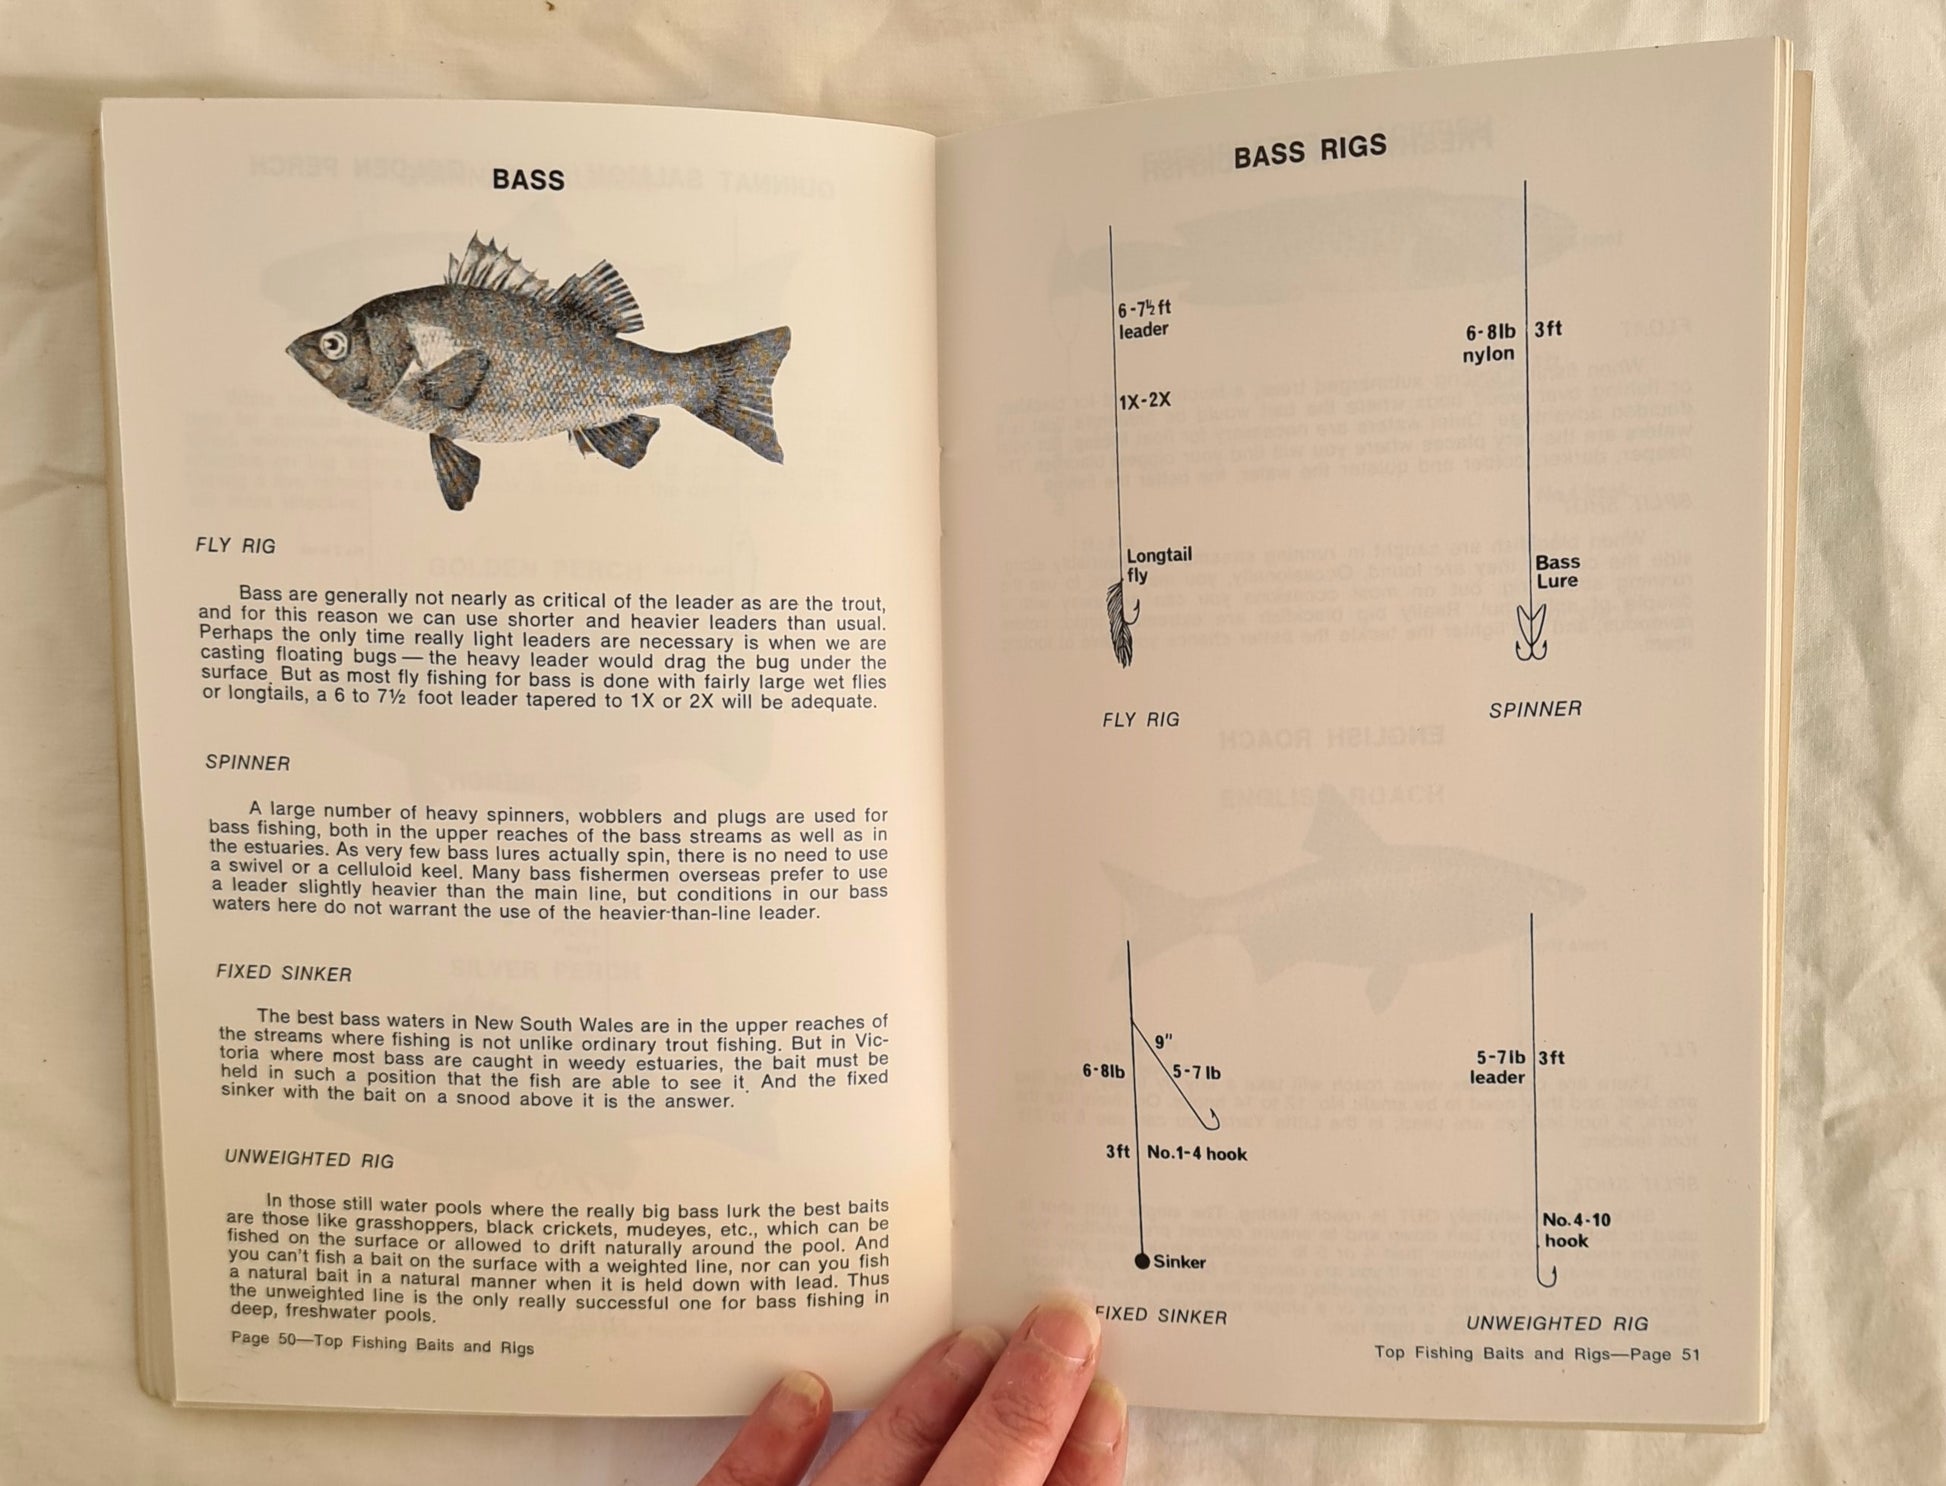 Top Fishing Baits & Rigs by Lance Wedlick – Morgan's Rare Books